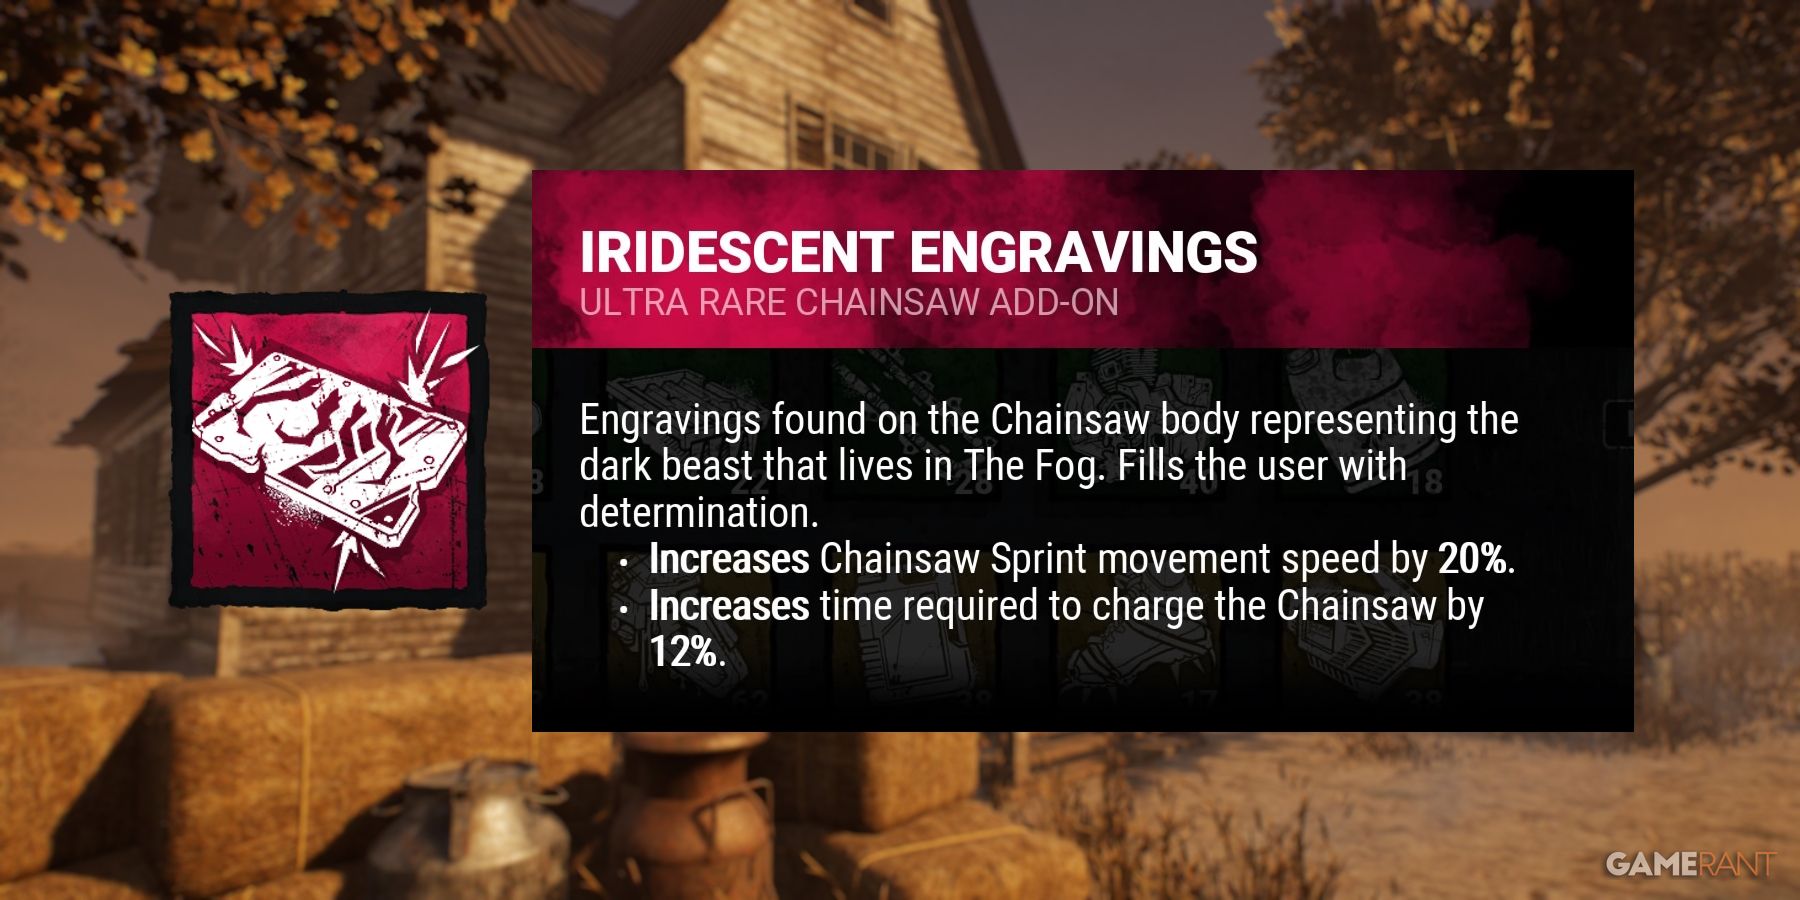 dead by daylight the hillbilly iridescent engravings addon